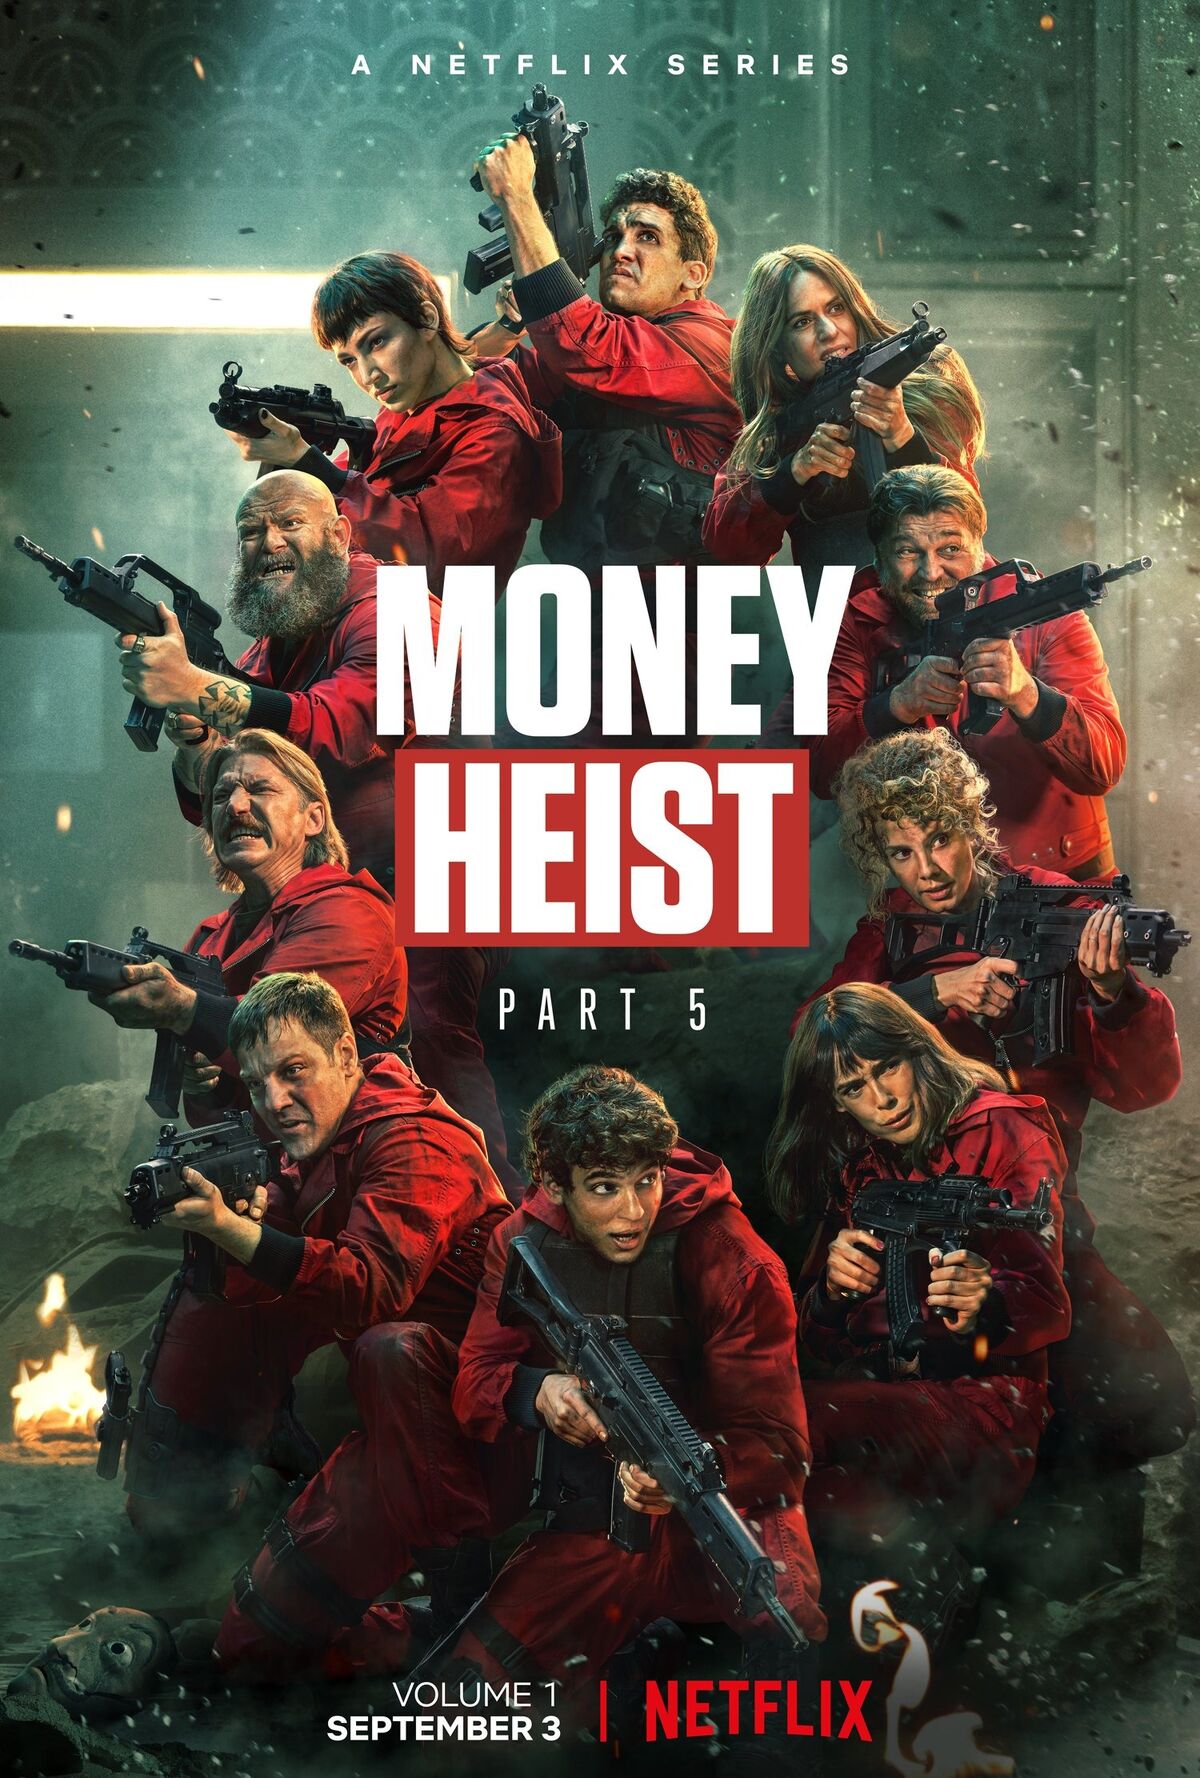 Squid Game to Money Heist: What Netflix's Foreign-Language Hits